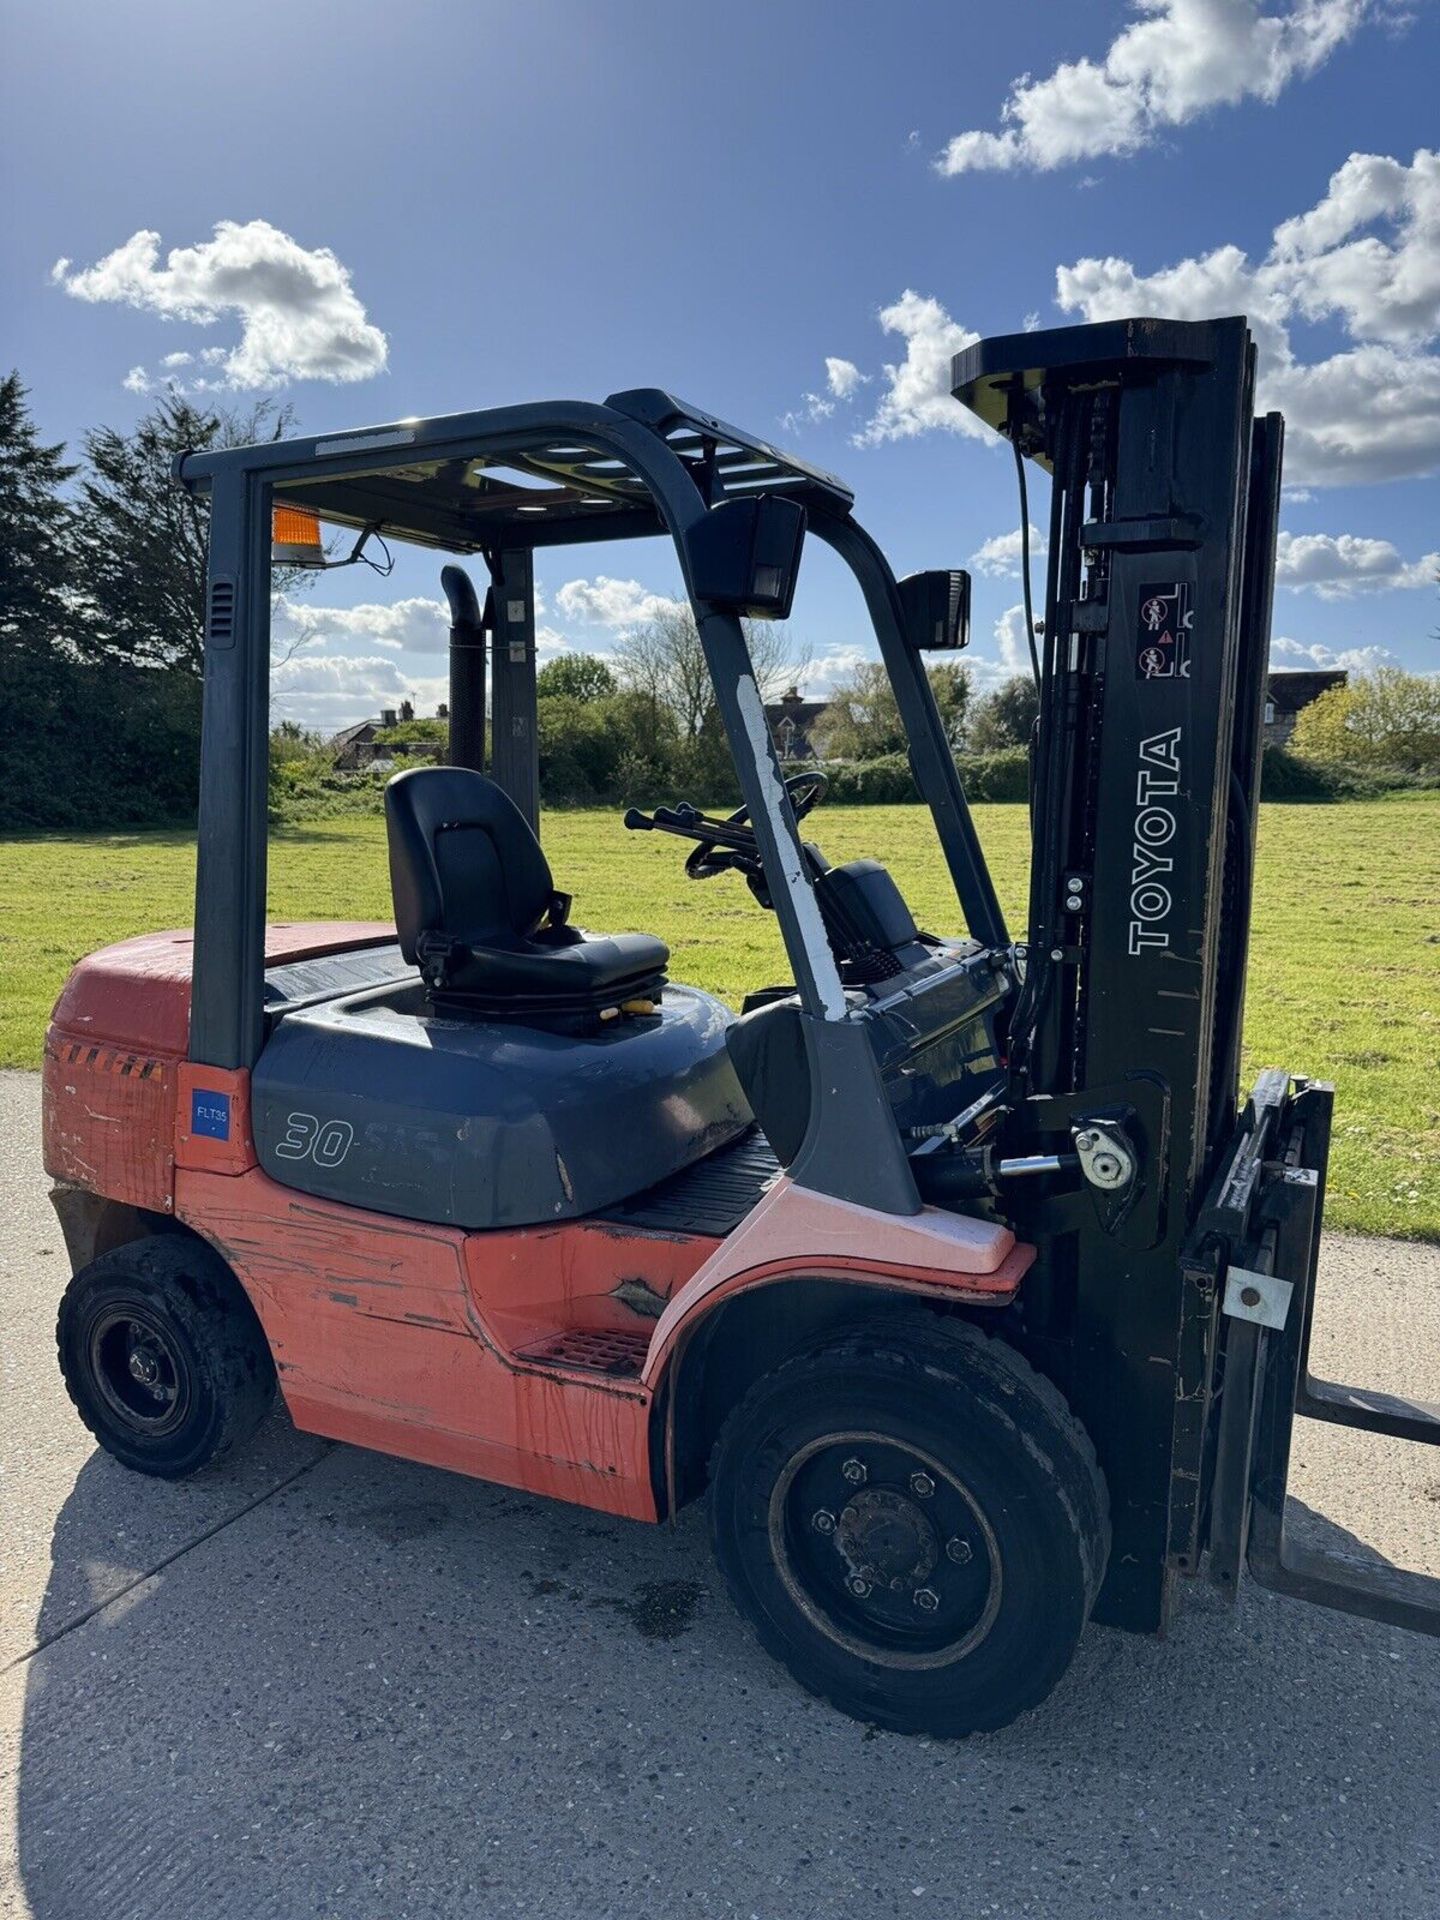 2005, TOYOTA - 3 Tonne Diesel Forklift (Triple Mast / Container Spec) - Image 2 of 7